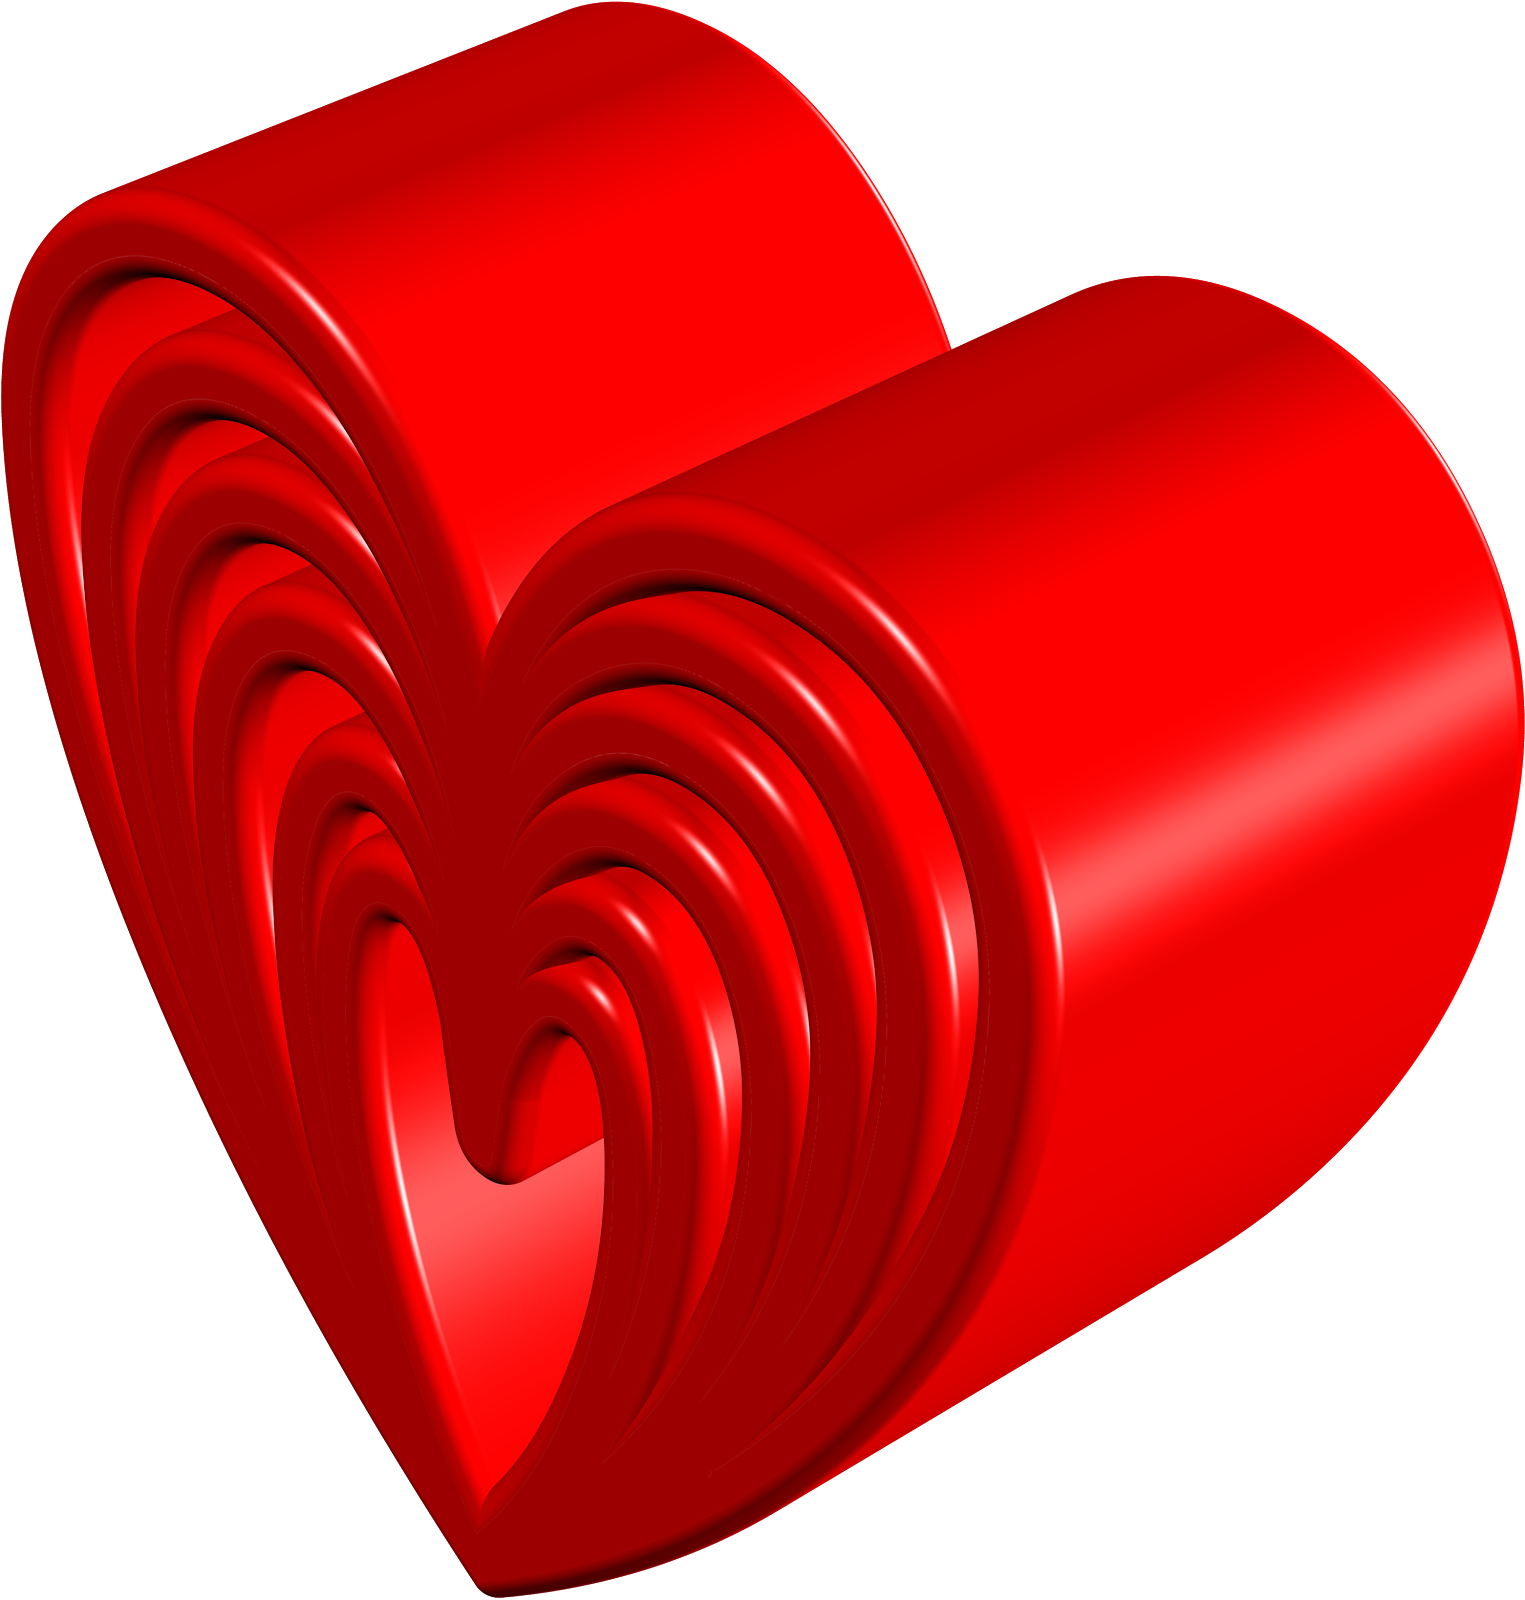 Love 3d Wallpapers Heart Red Colour With Messages Poetry - Heart Red Colour (1525x1600)